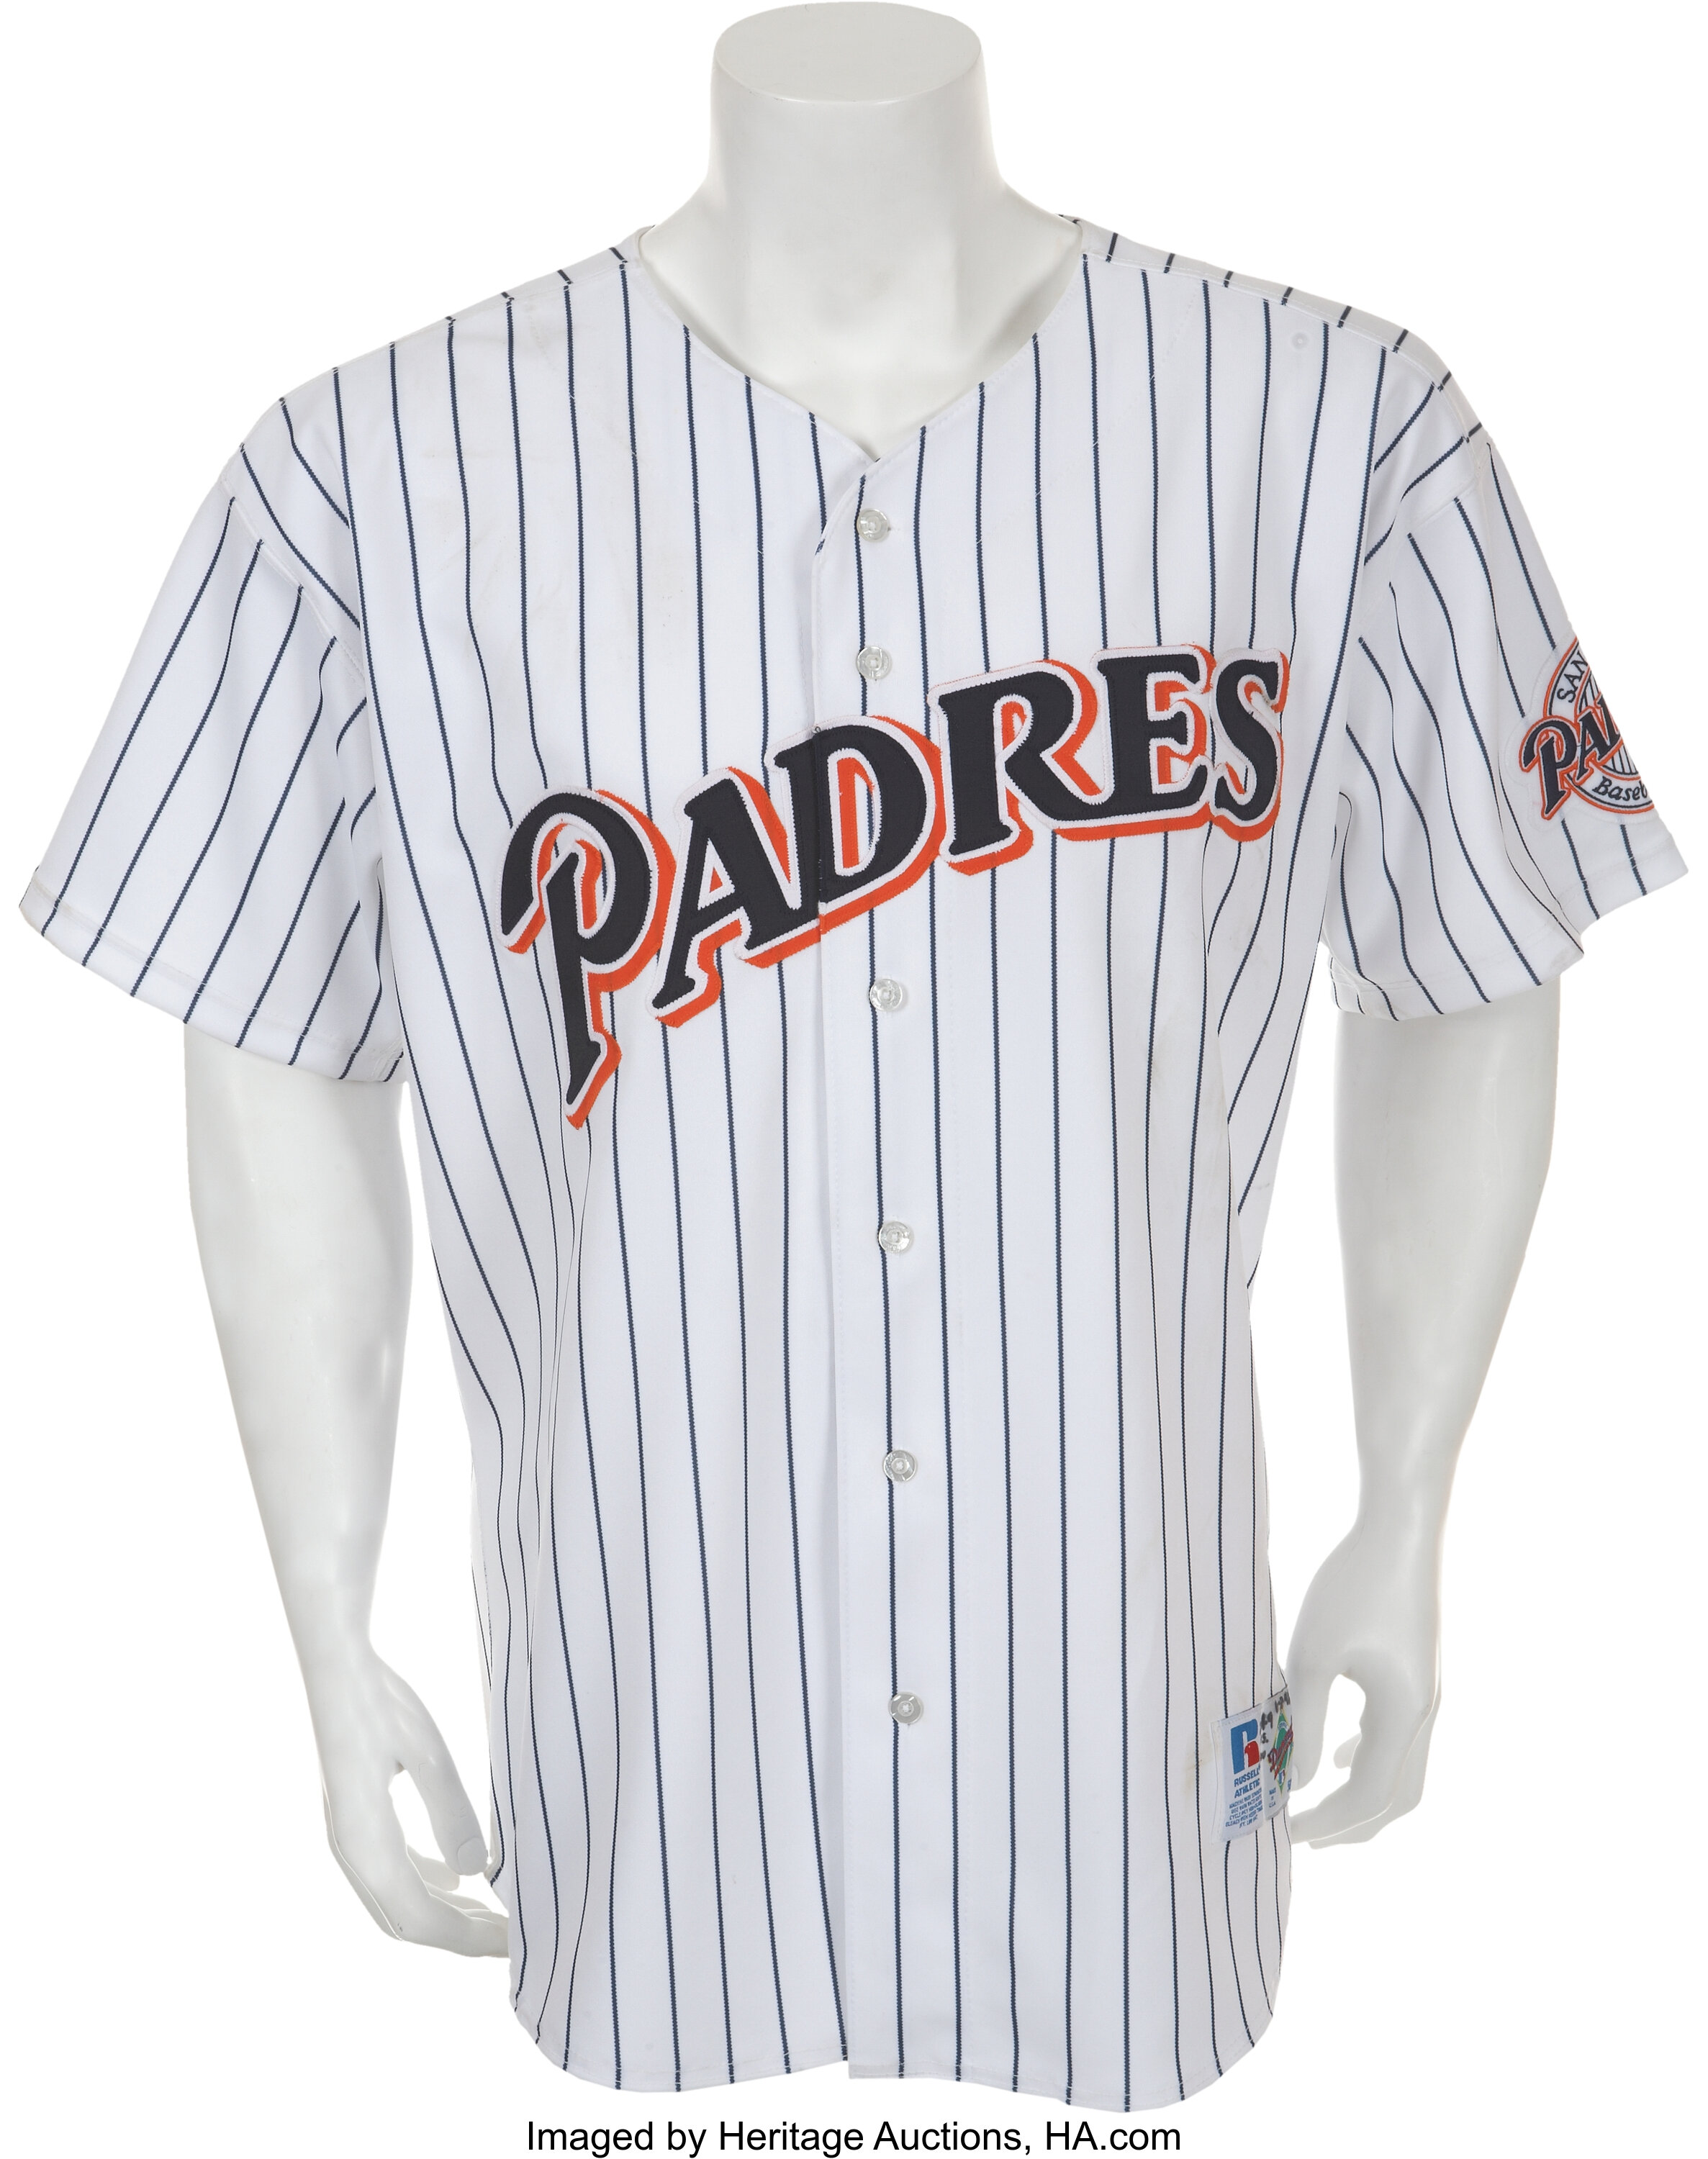 Tony Gwynn Signed Padres 1993 Game-Used Jersey (Player LOA)